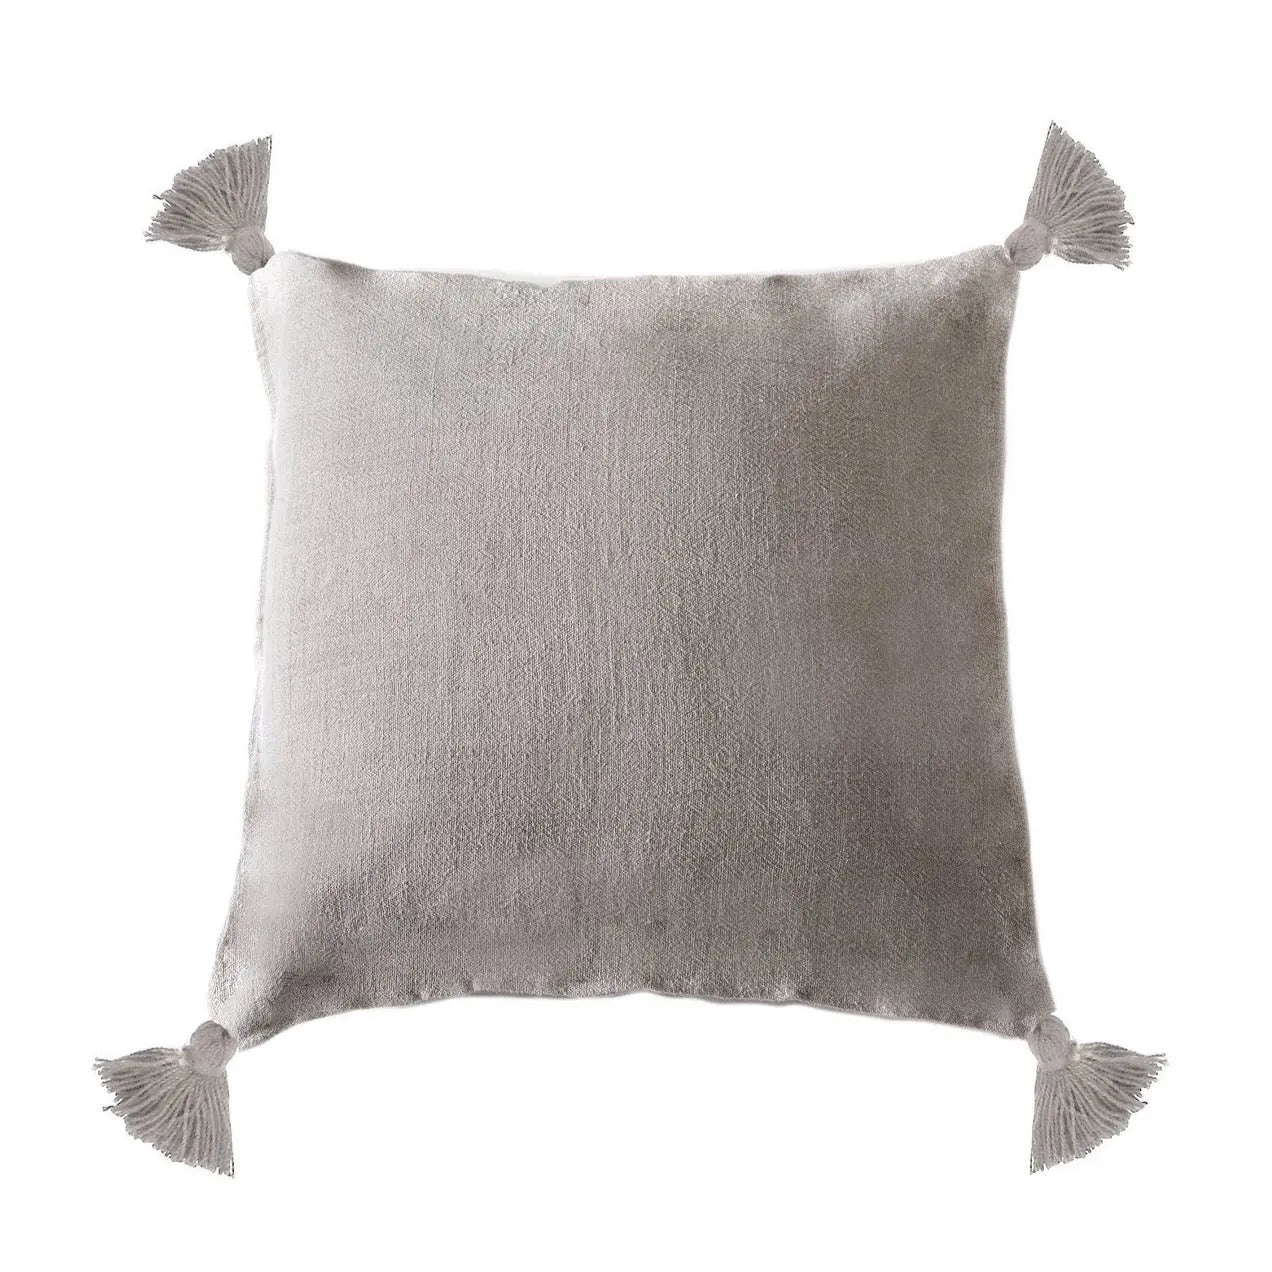 Montauk Linen Pillow with Tassels - Home Smith